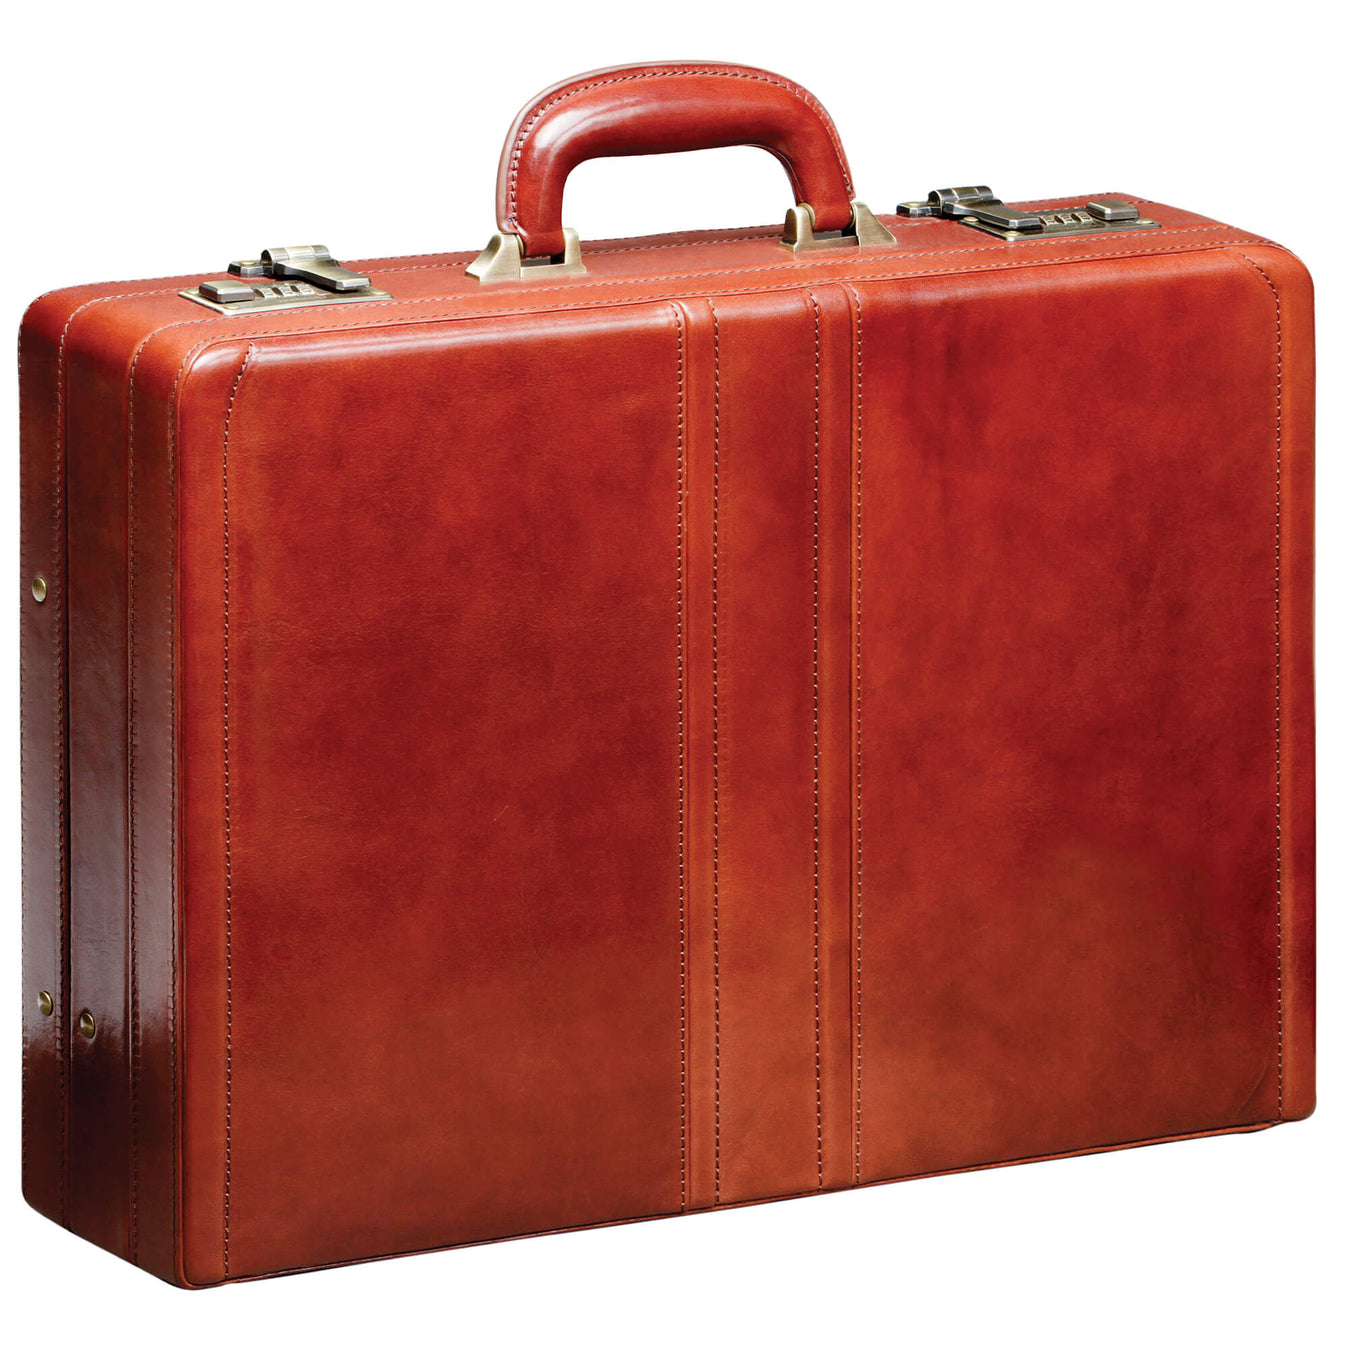 Traditional & Classic Briefcases